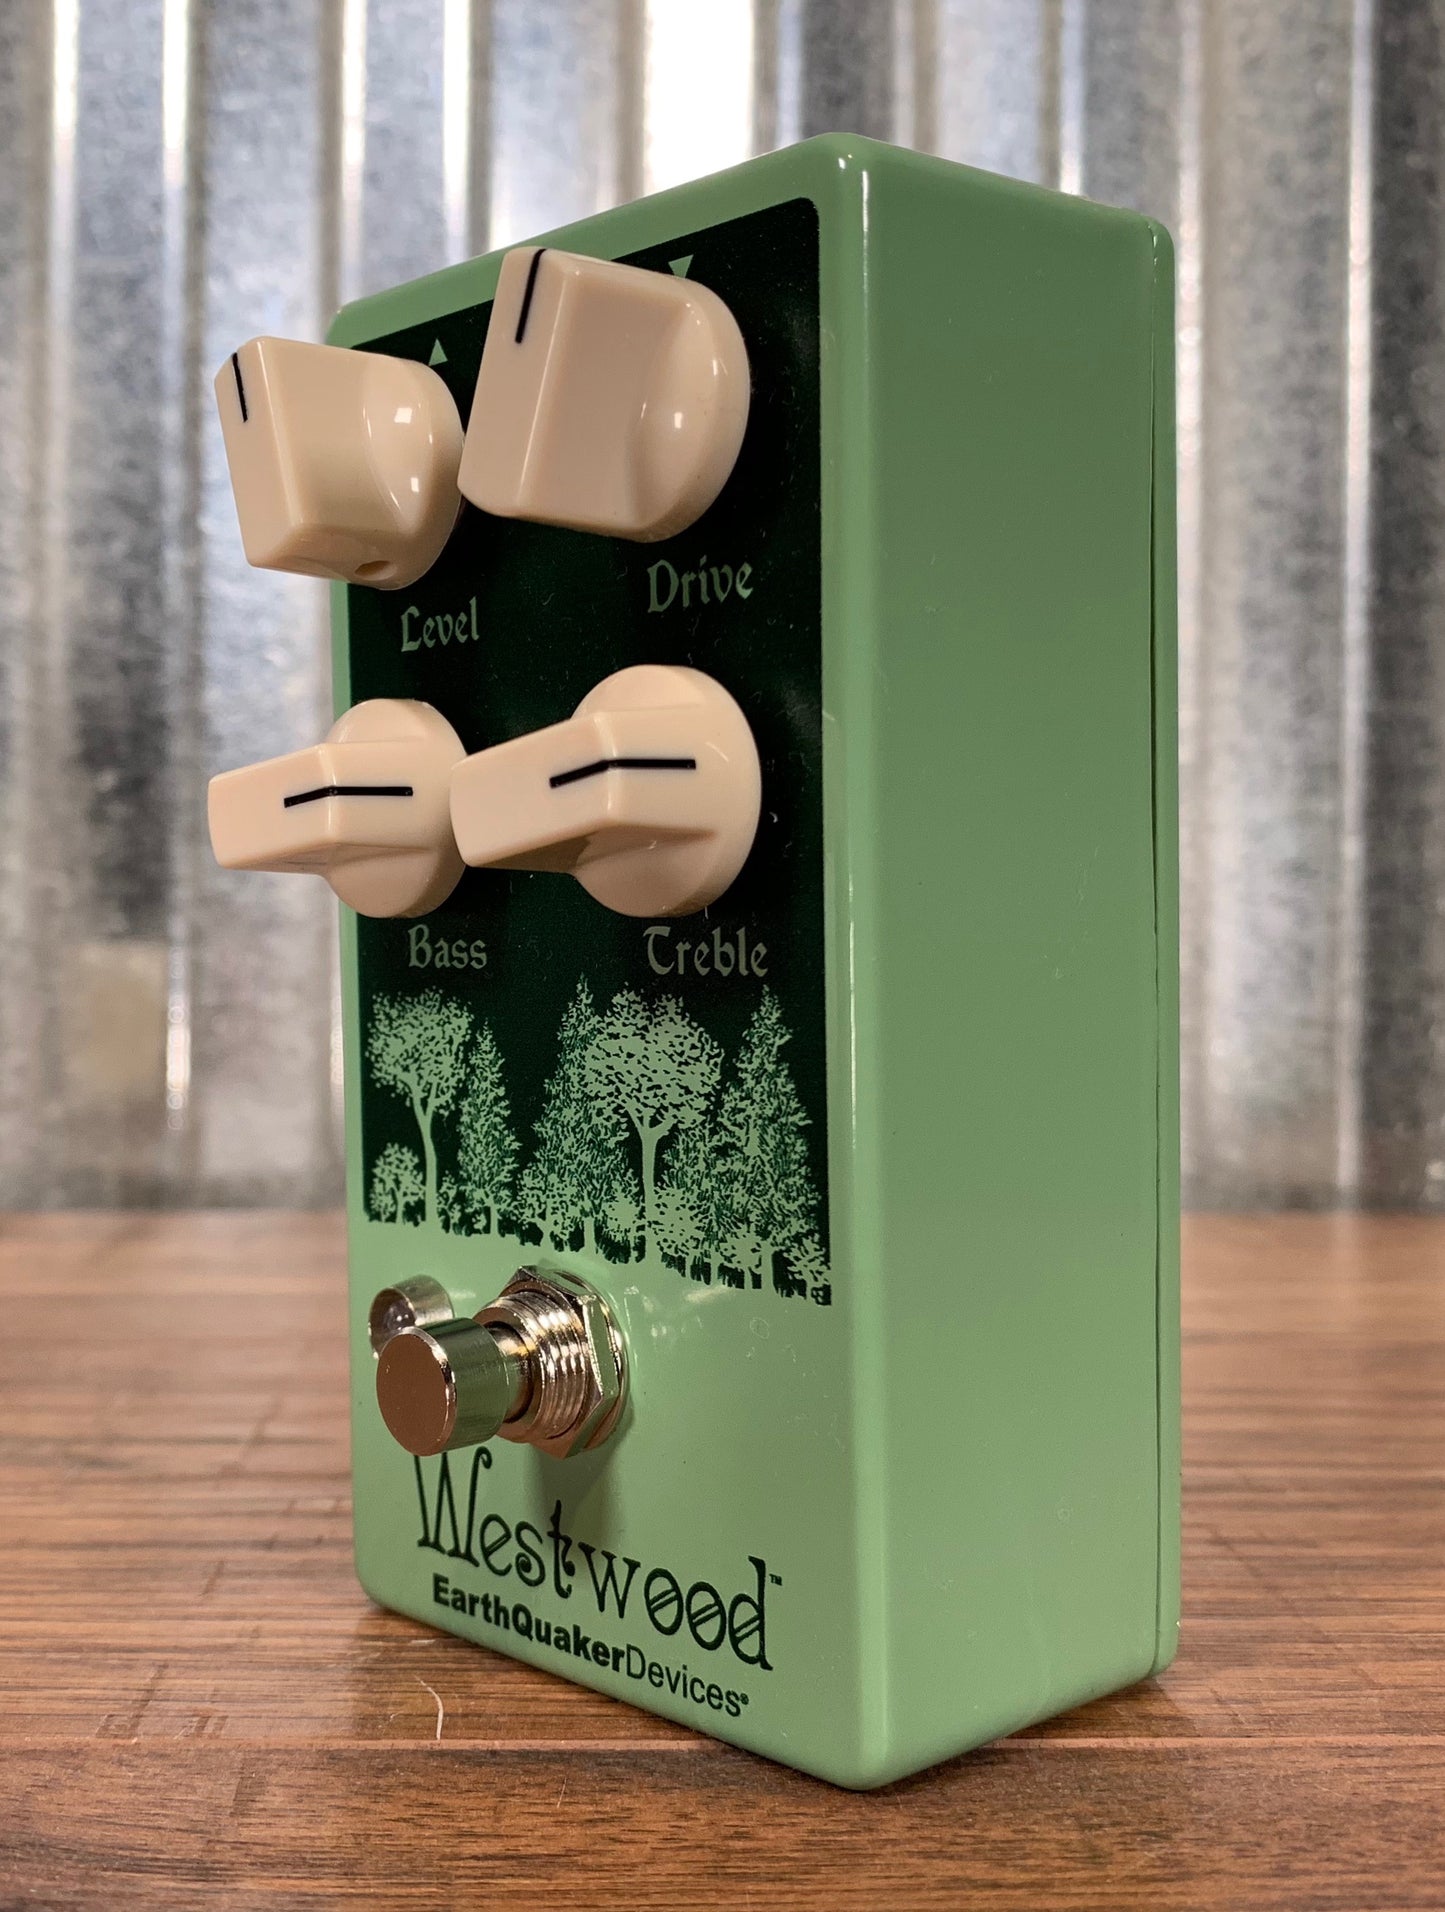 Earthquaker Devices EQD Westwood Overdrive Guitar Effect Pedal